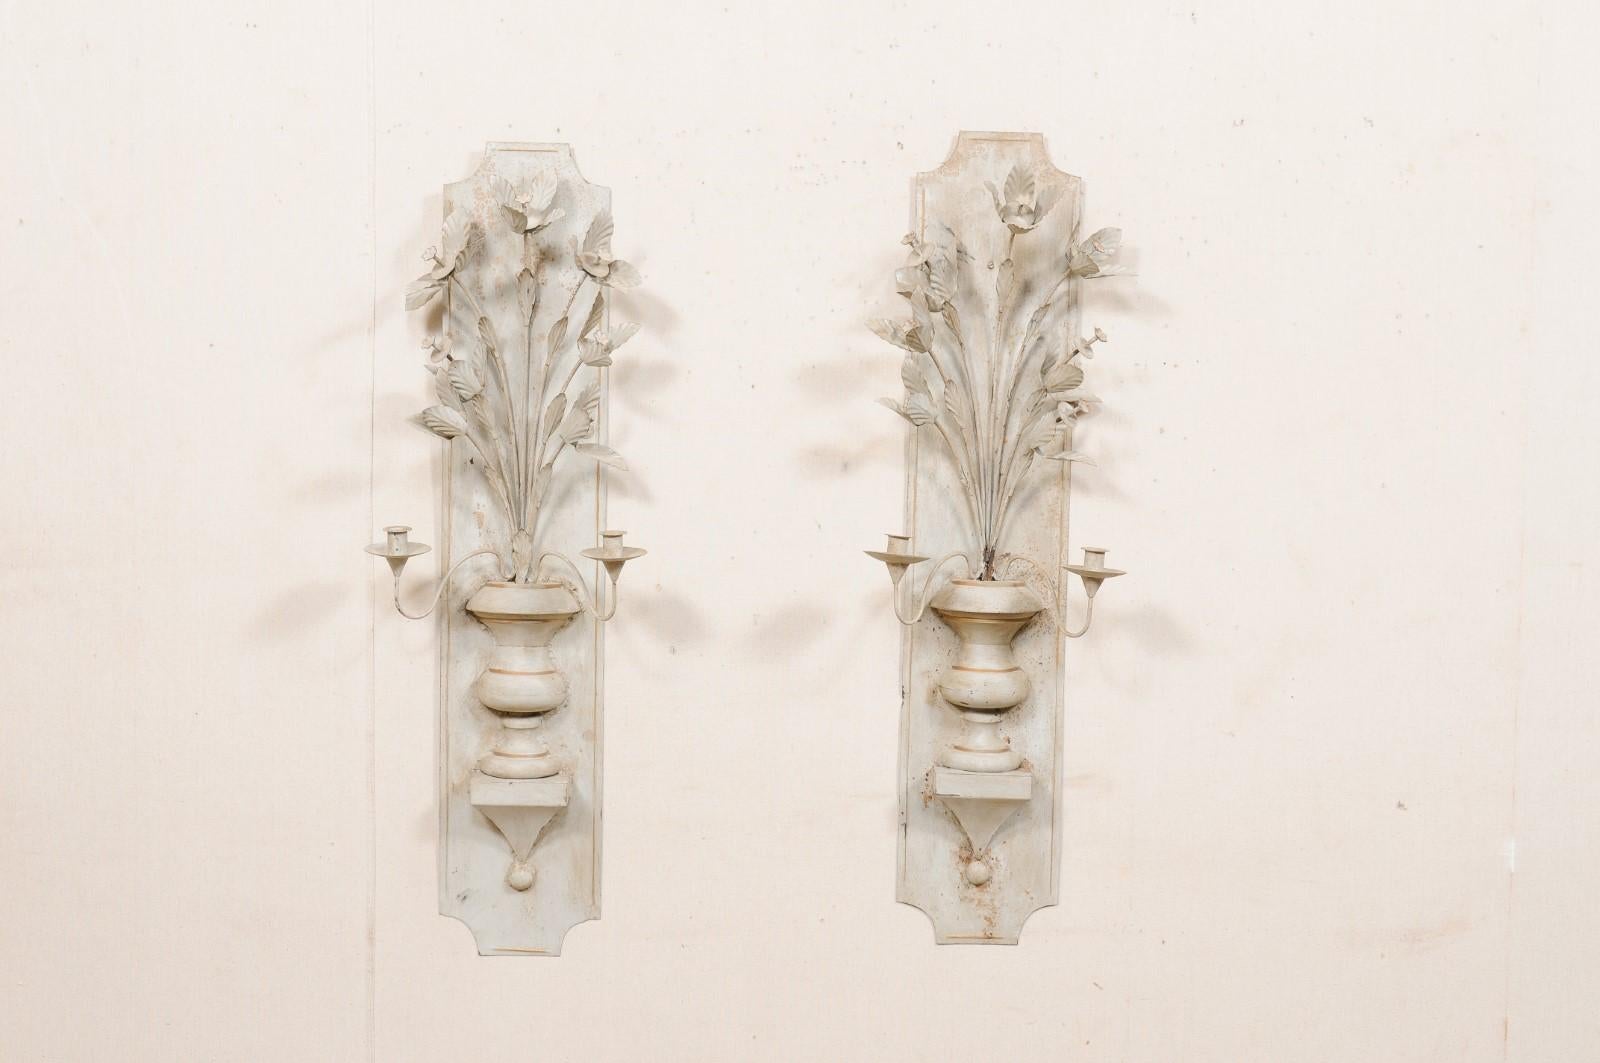 A pair of French two-light sculpted and painted metal candle wall sconces from the mid 20th century. This vintage pair of decorative wall sconces from France feature elongated metal backplates with sculpted urns with a bouquet of flowers splaying